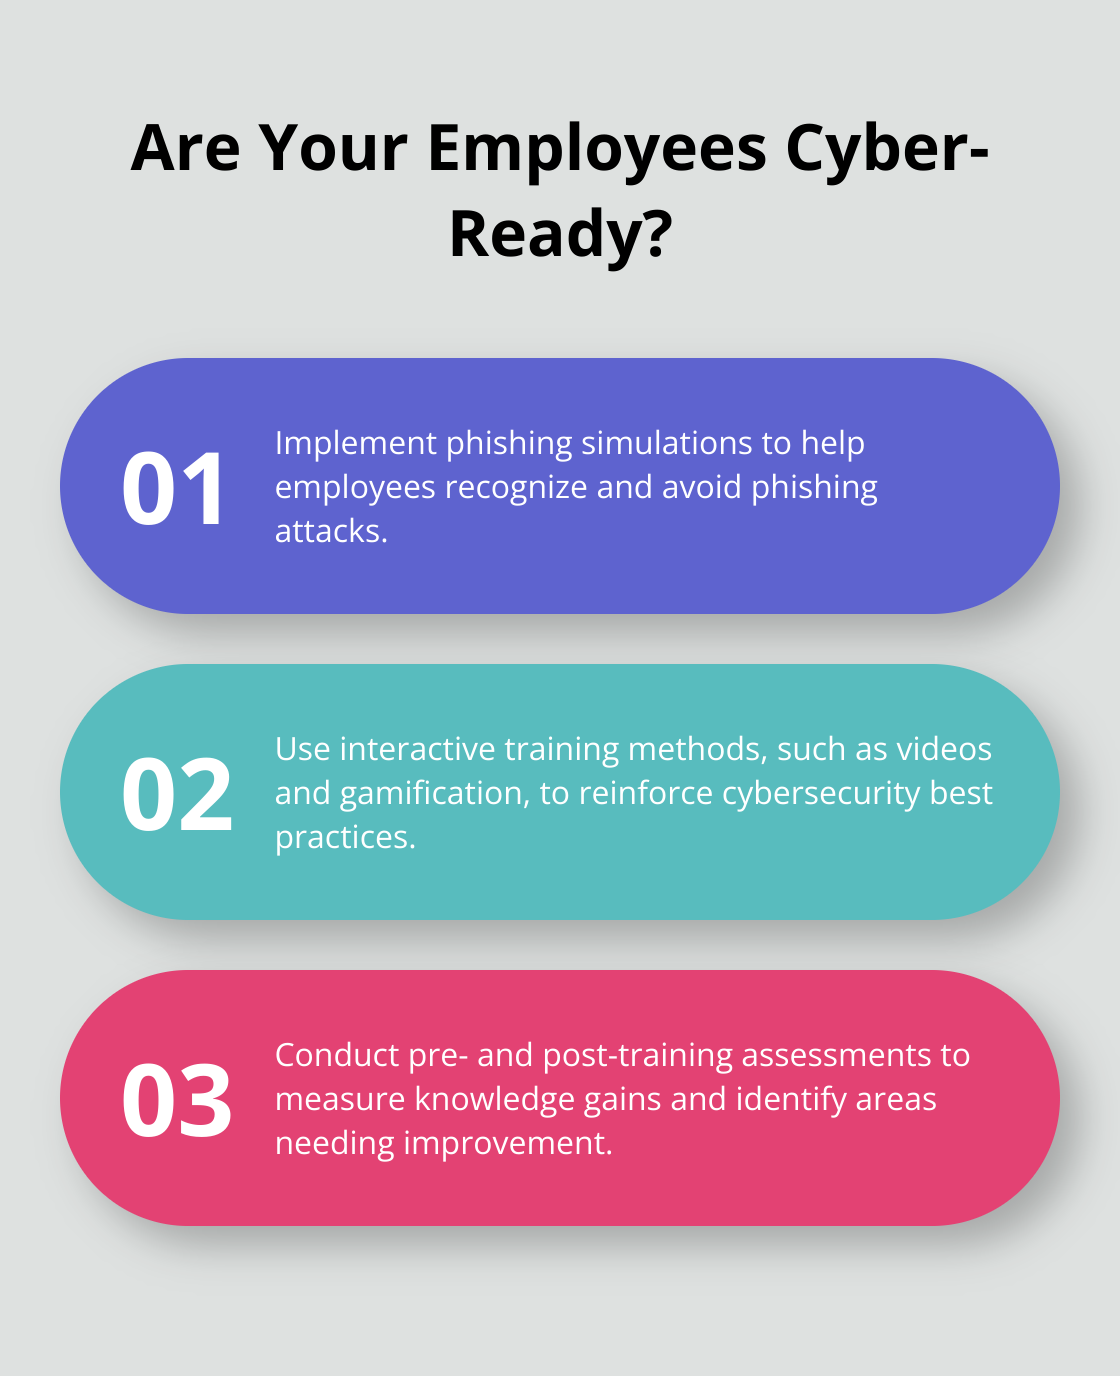 Fact - Are Your Employees Cyber-Ready?